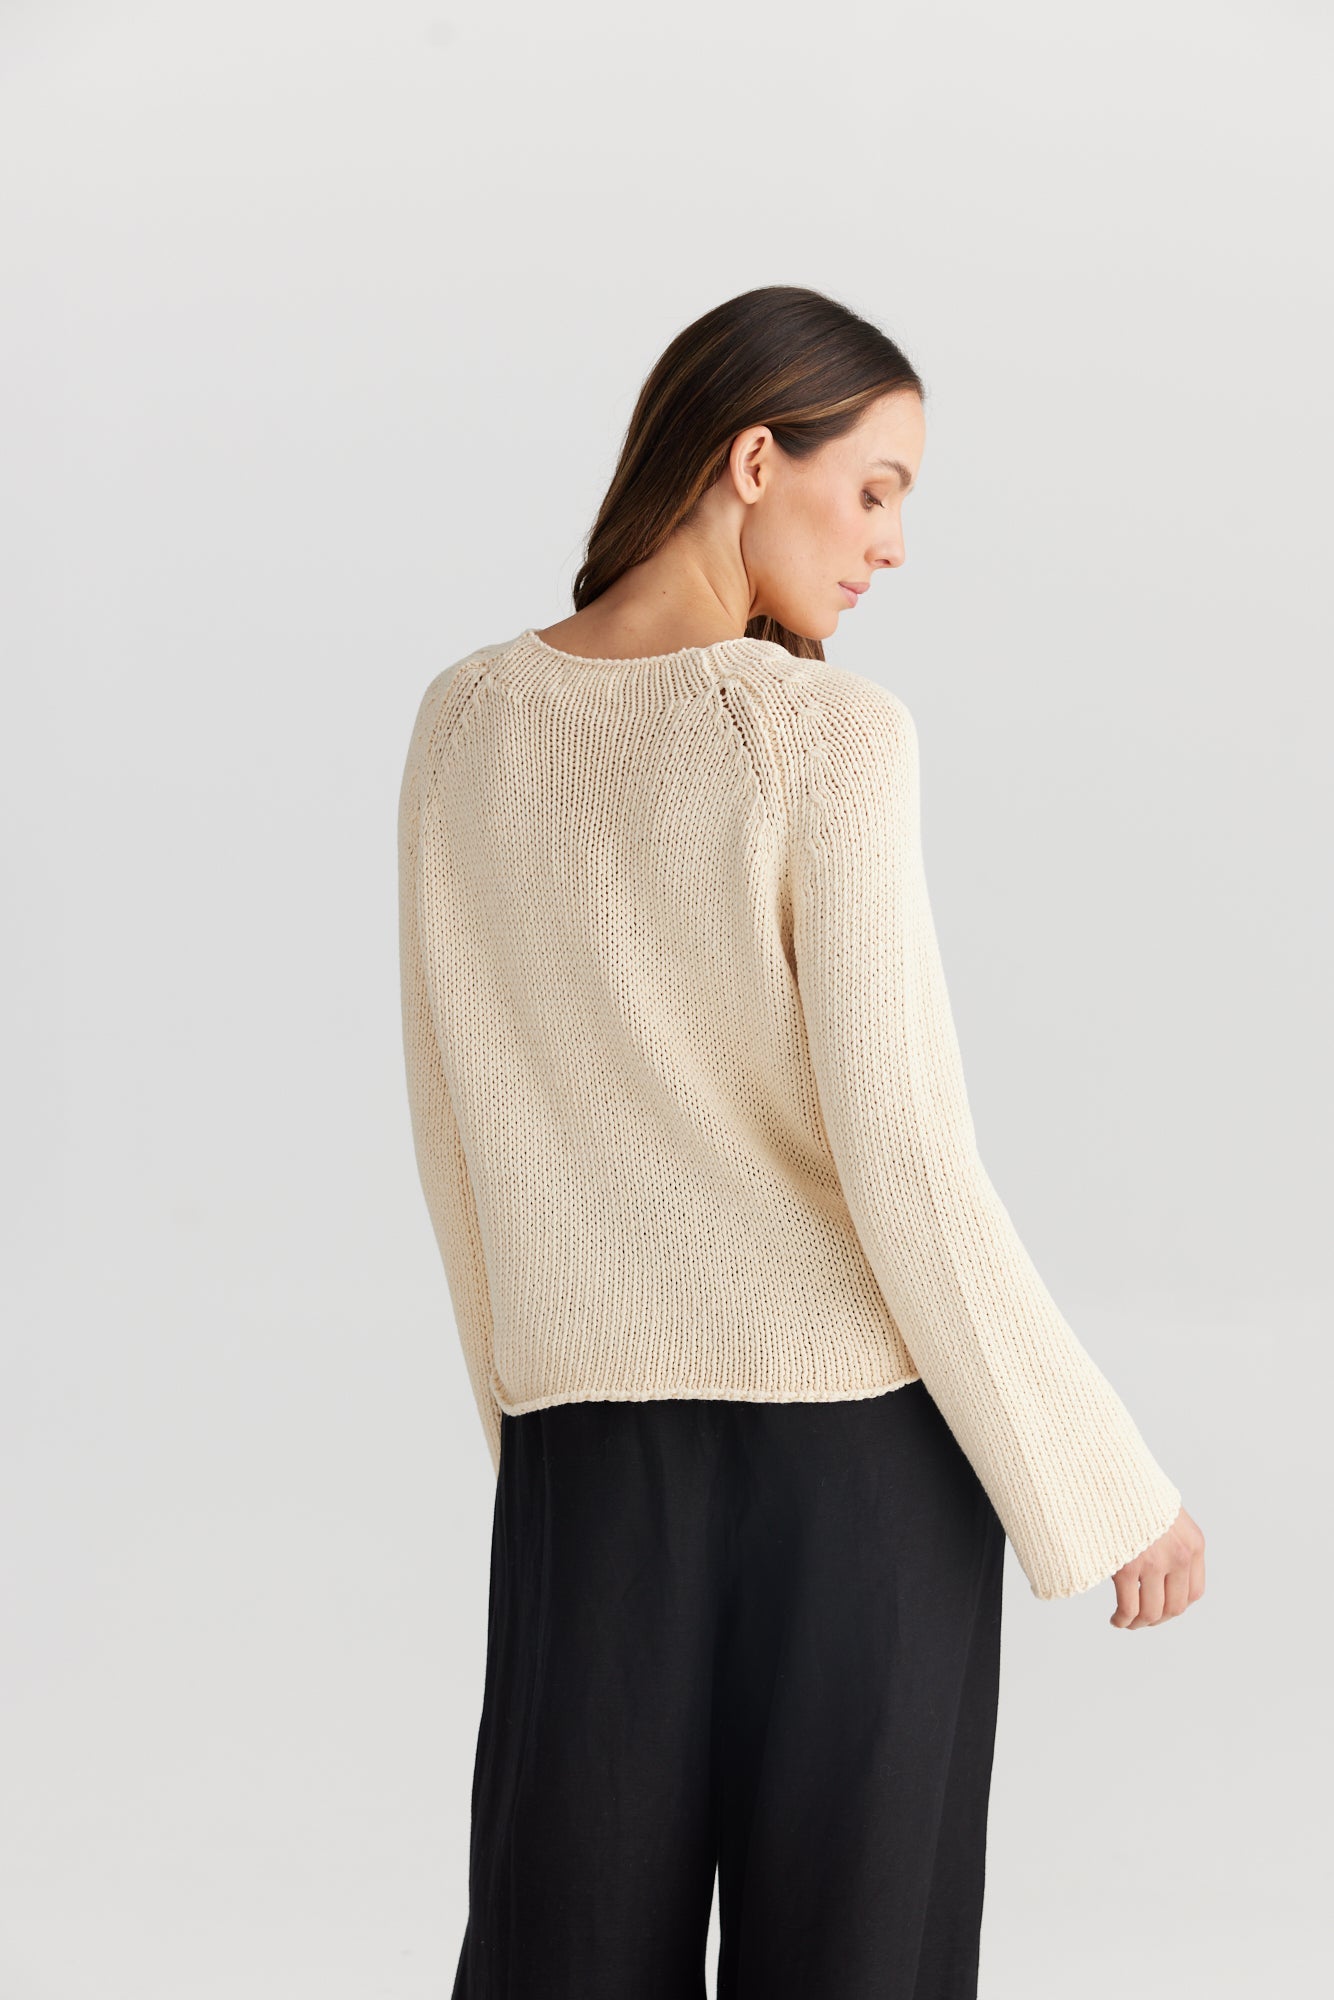 Esse Knit - Natural-Knitwear & Jumpers-The Shanty Corporation-The Bay Room